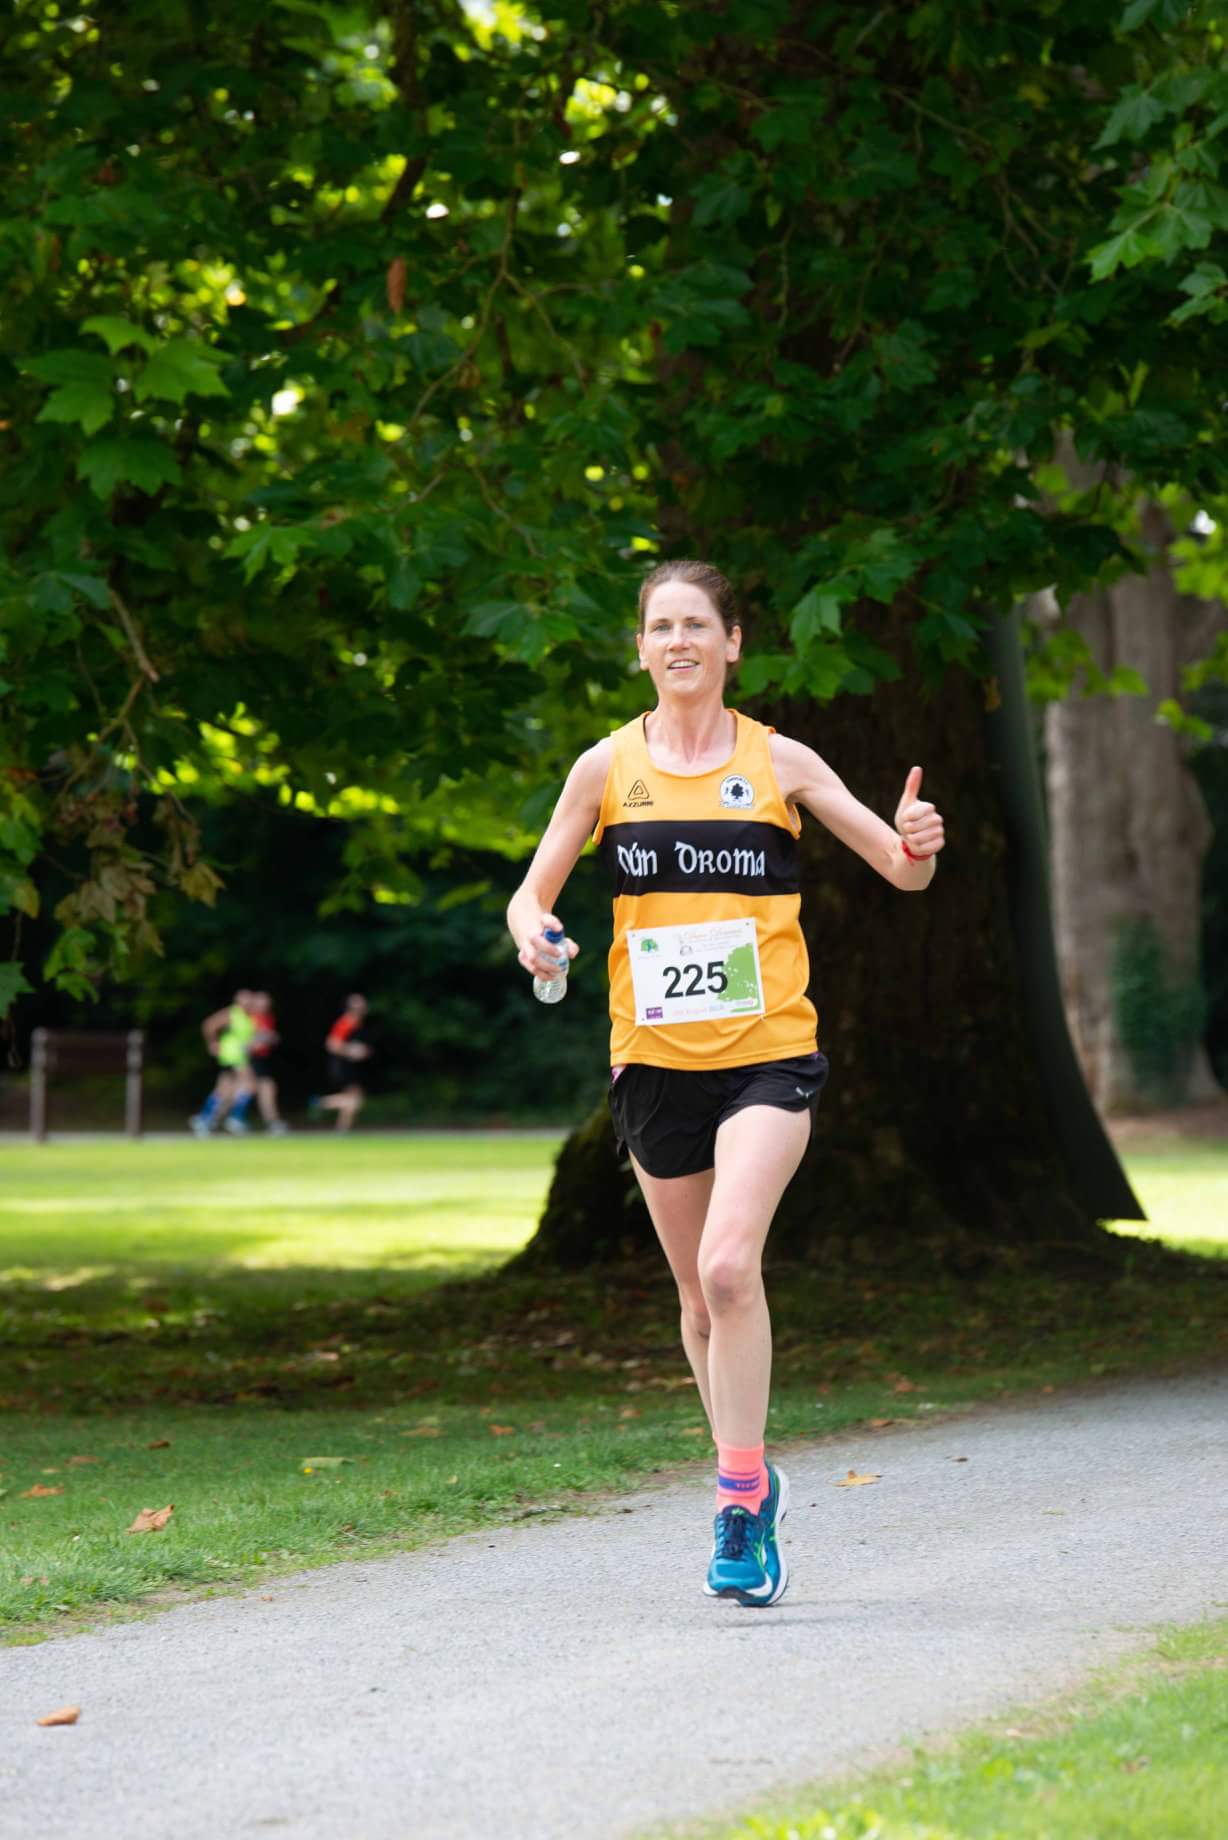 Linda Grogan who was 2nd Lady at the Curraghchase 10K.